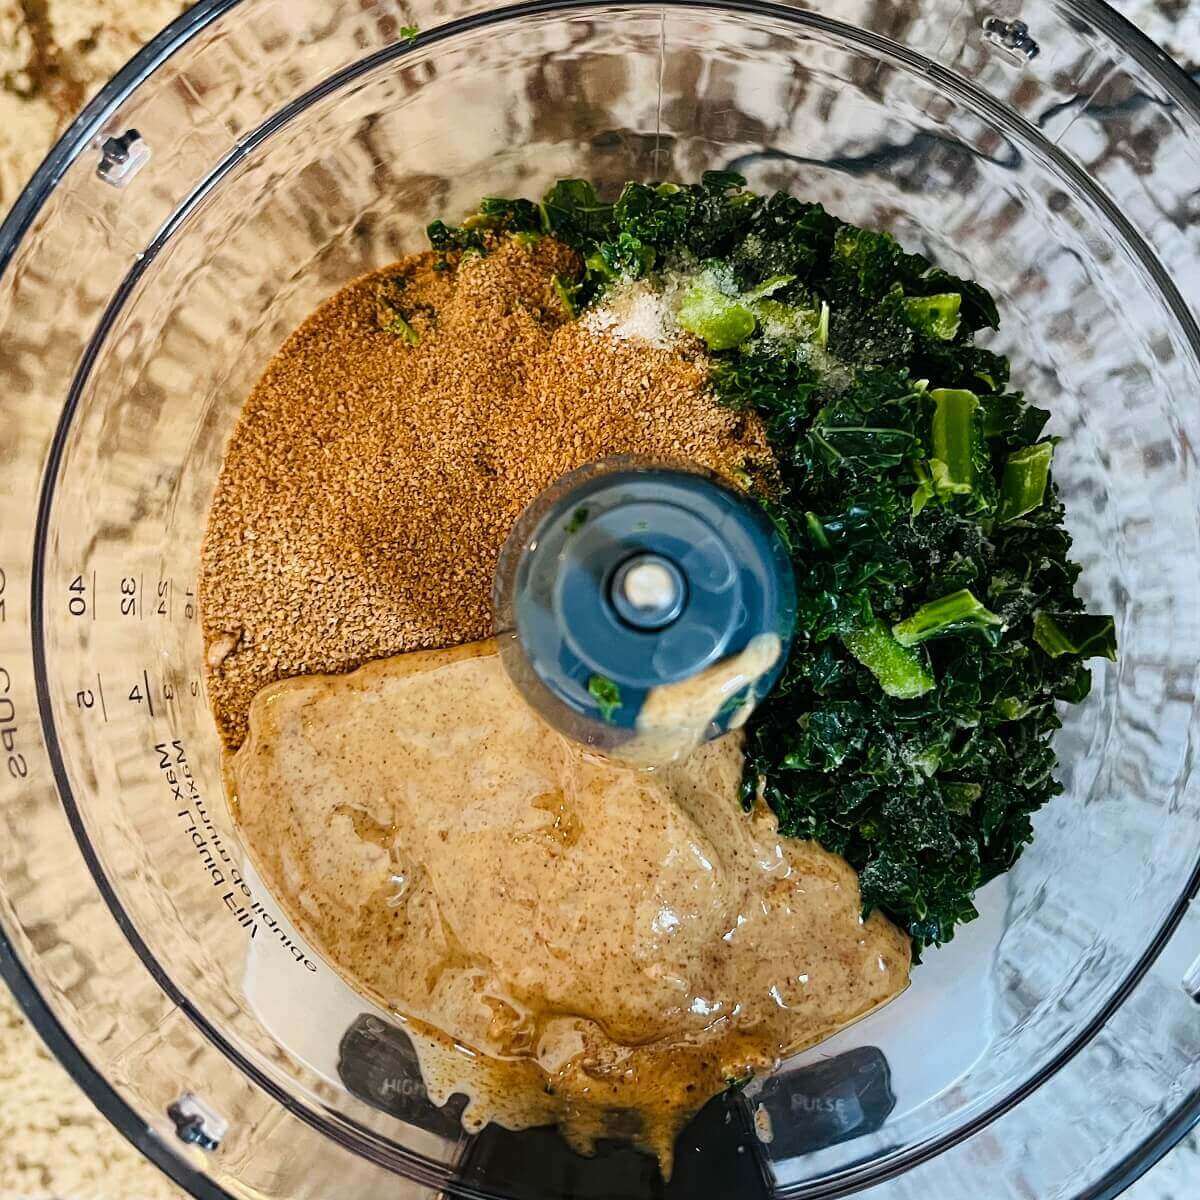 Kale, almond butter, coconut sugar, and other ingredients in a food processor.